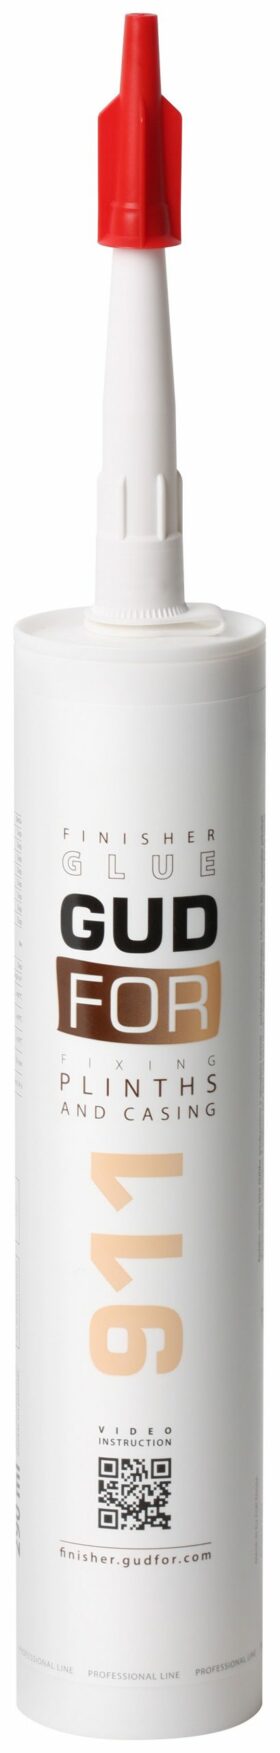 911 finishing master's glue for skirting boards and edging